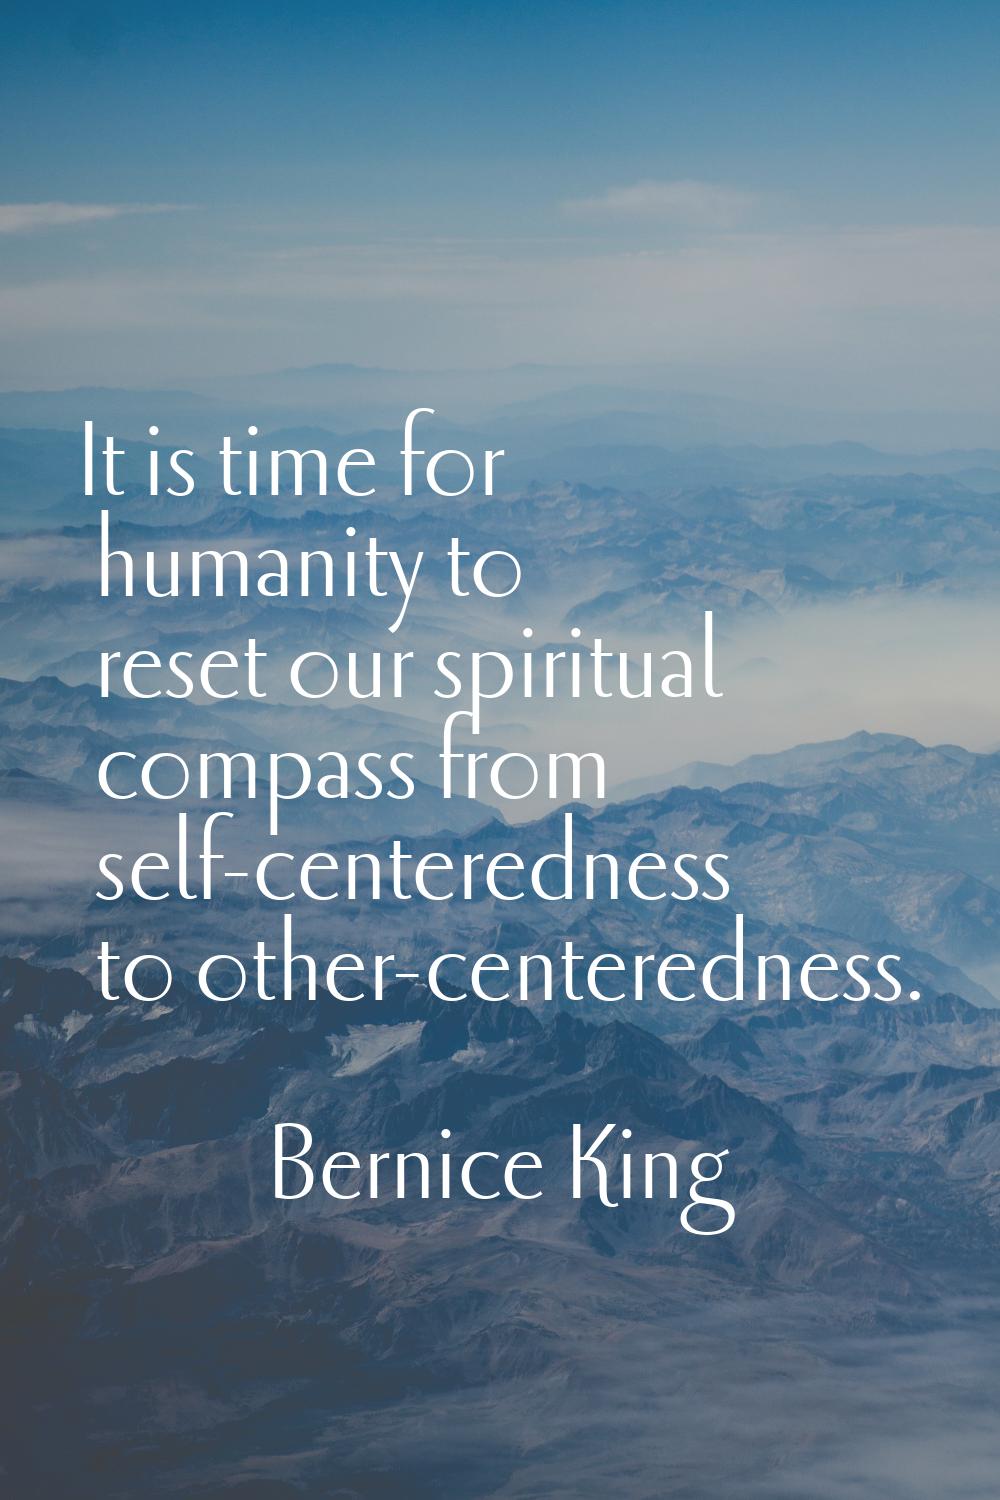 It is time for humanity to reset our spiritual compass from self-centeredness to other-centeredness